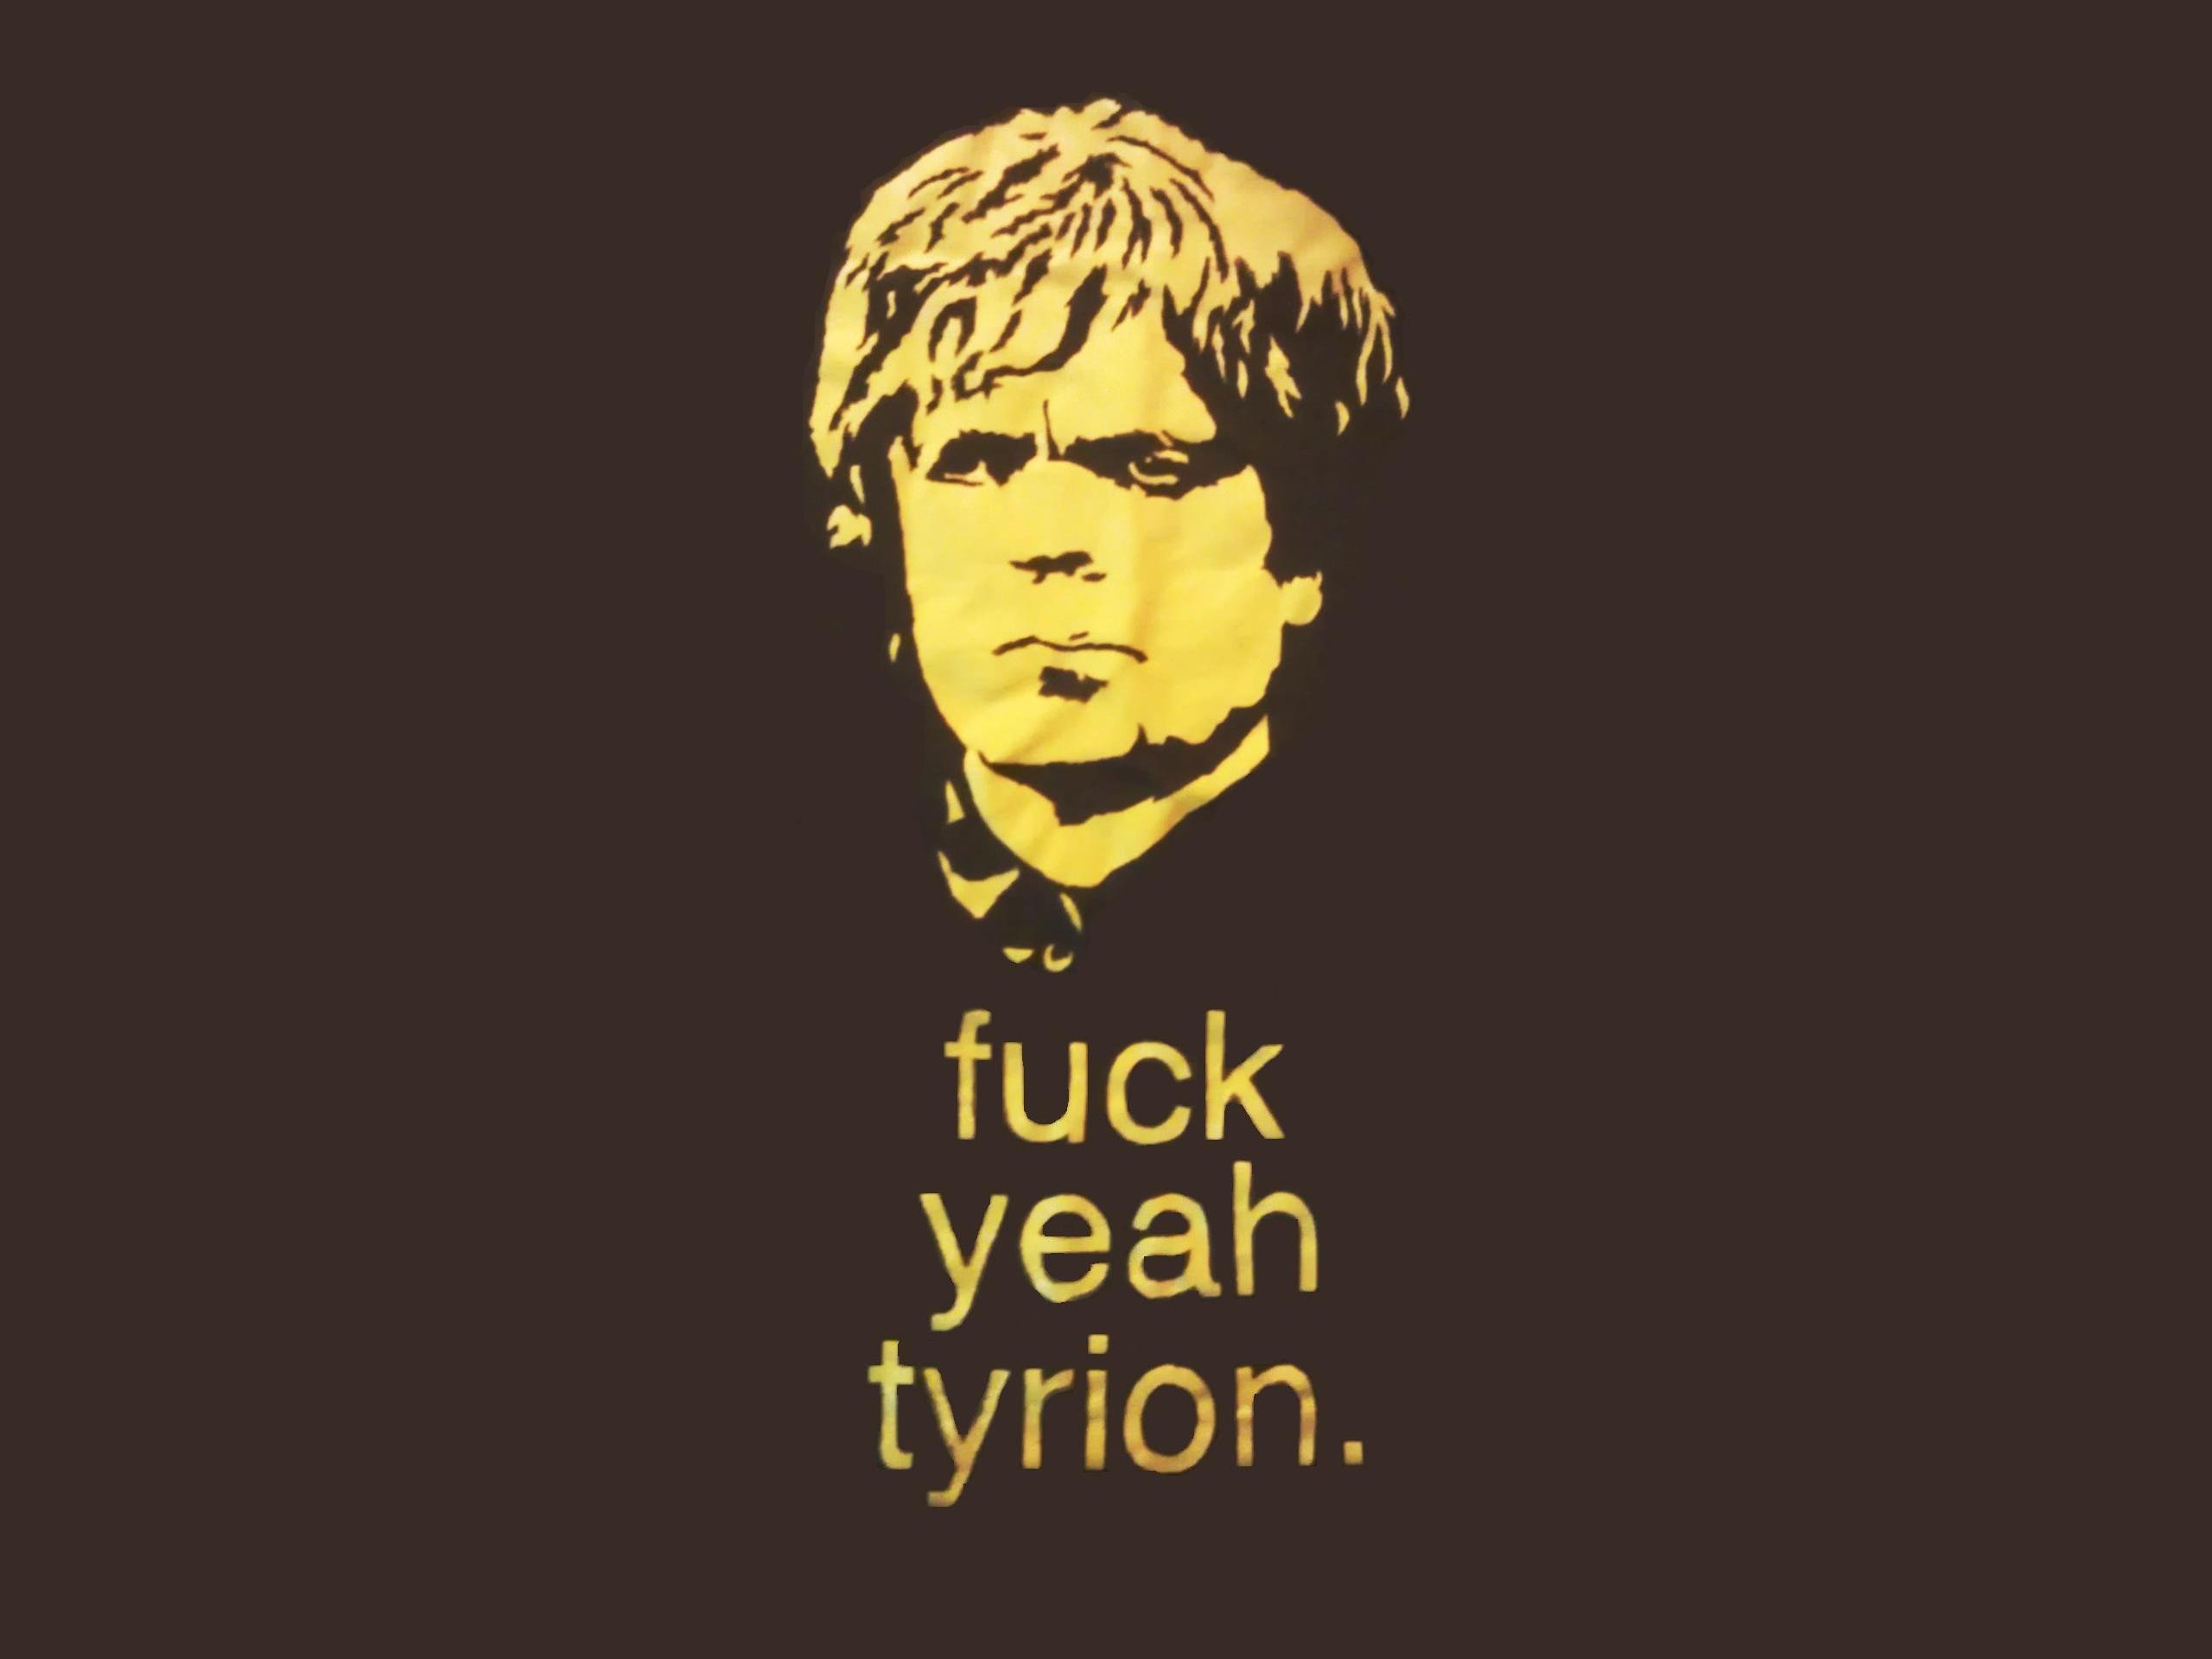 humor, Funny, Typography, Game, Of, Thrones, Tv, Series, Tyrion, Lannister, Fuck, Yea, Brown, Background Wallpaper